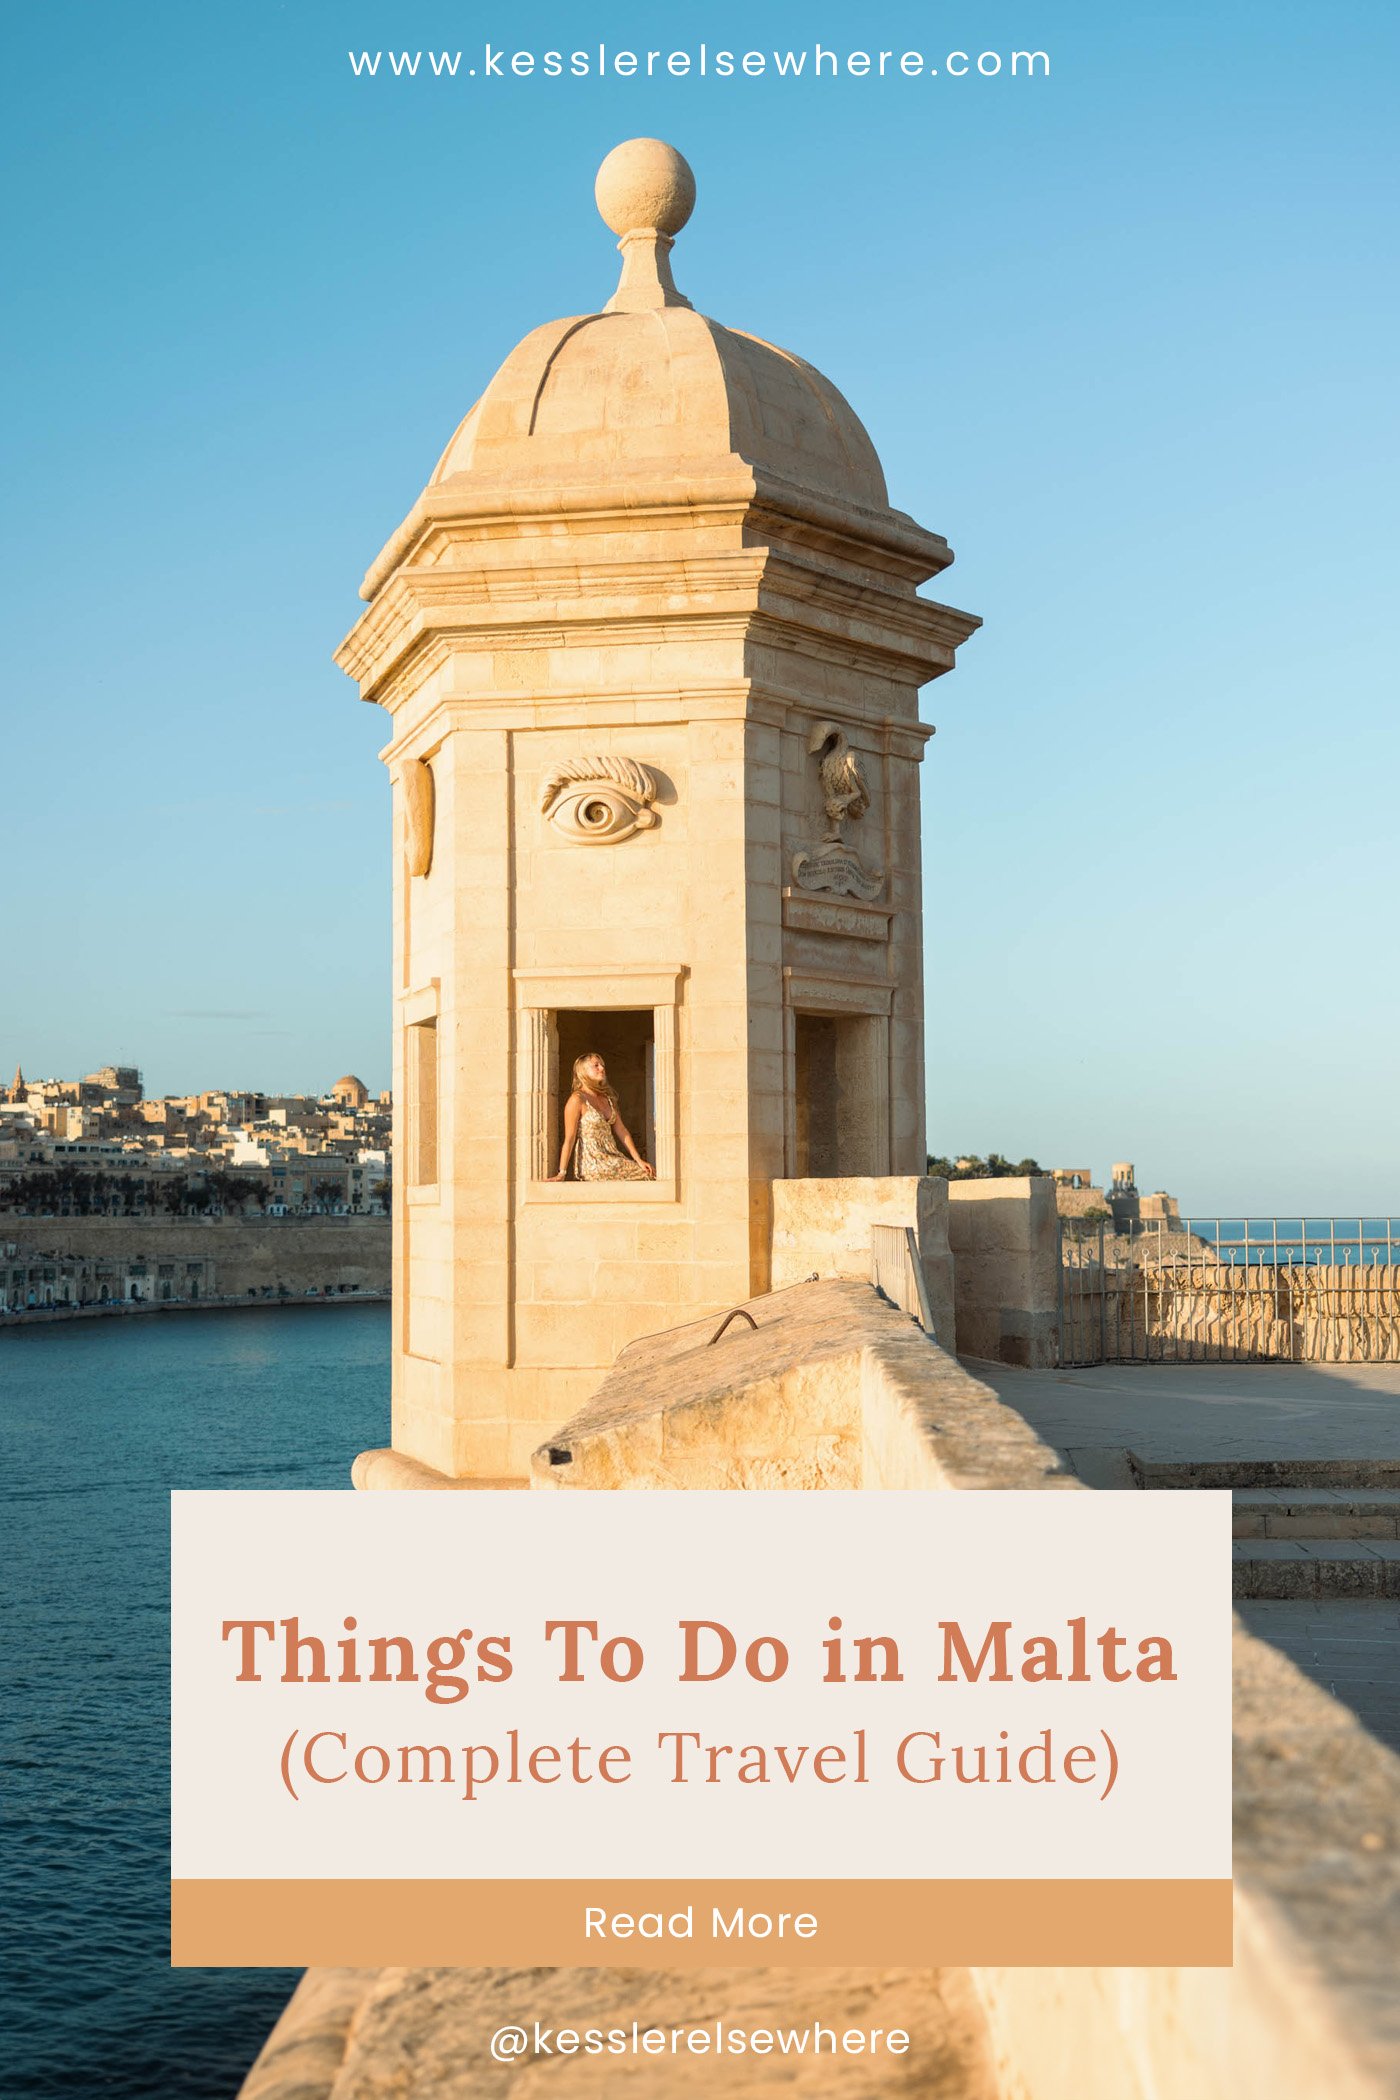 Things To Do in Malta (Complete Guide)